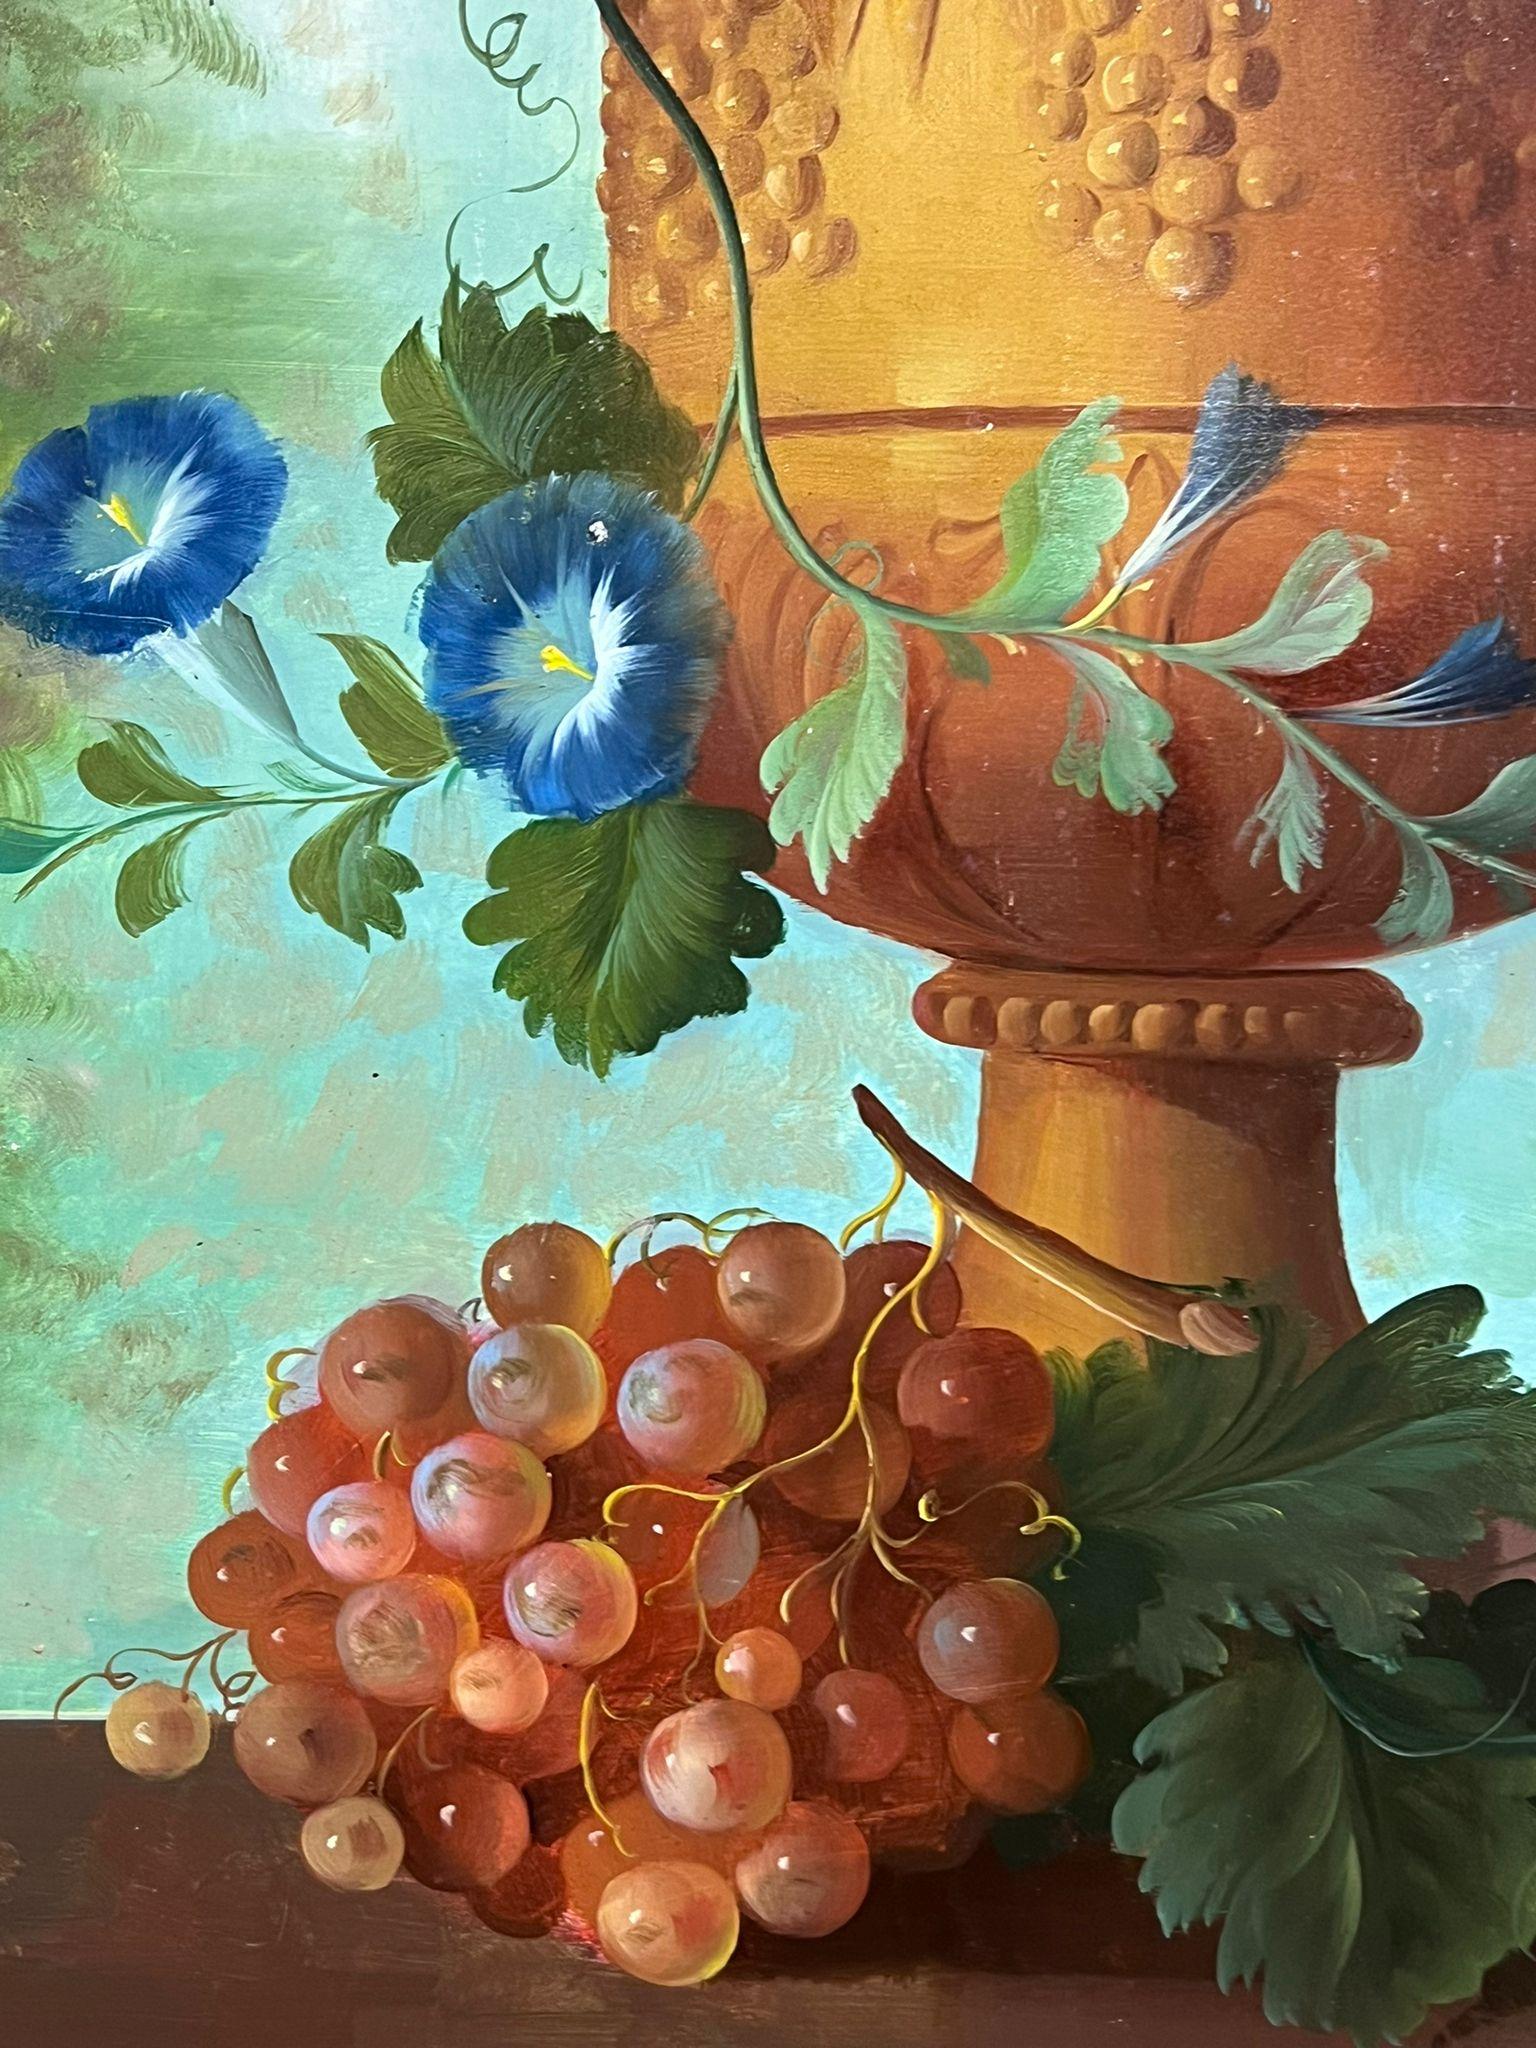 Huge Classical Still Life Flowers & Fruit Still Life in Stone Urn Oil Painting  For Sale 3